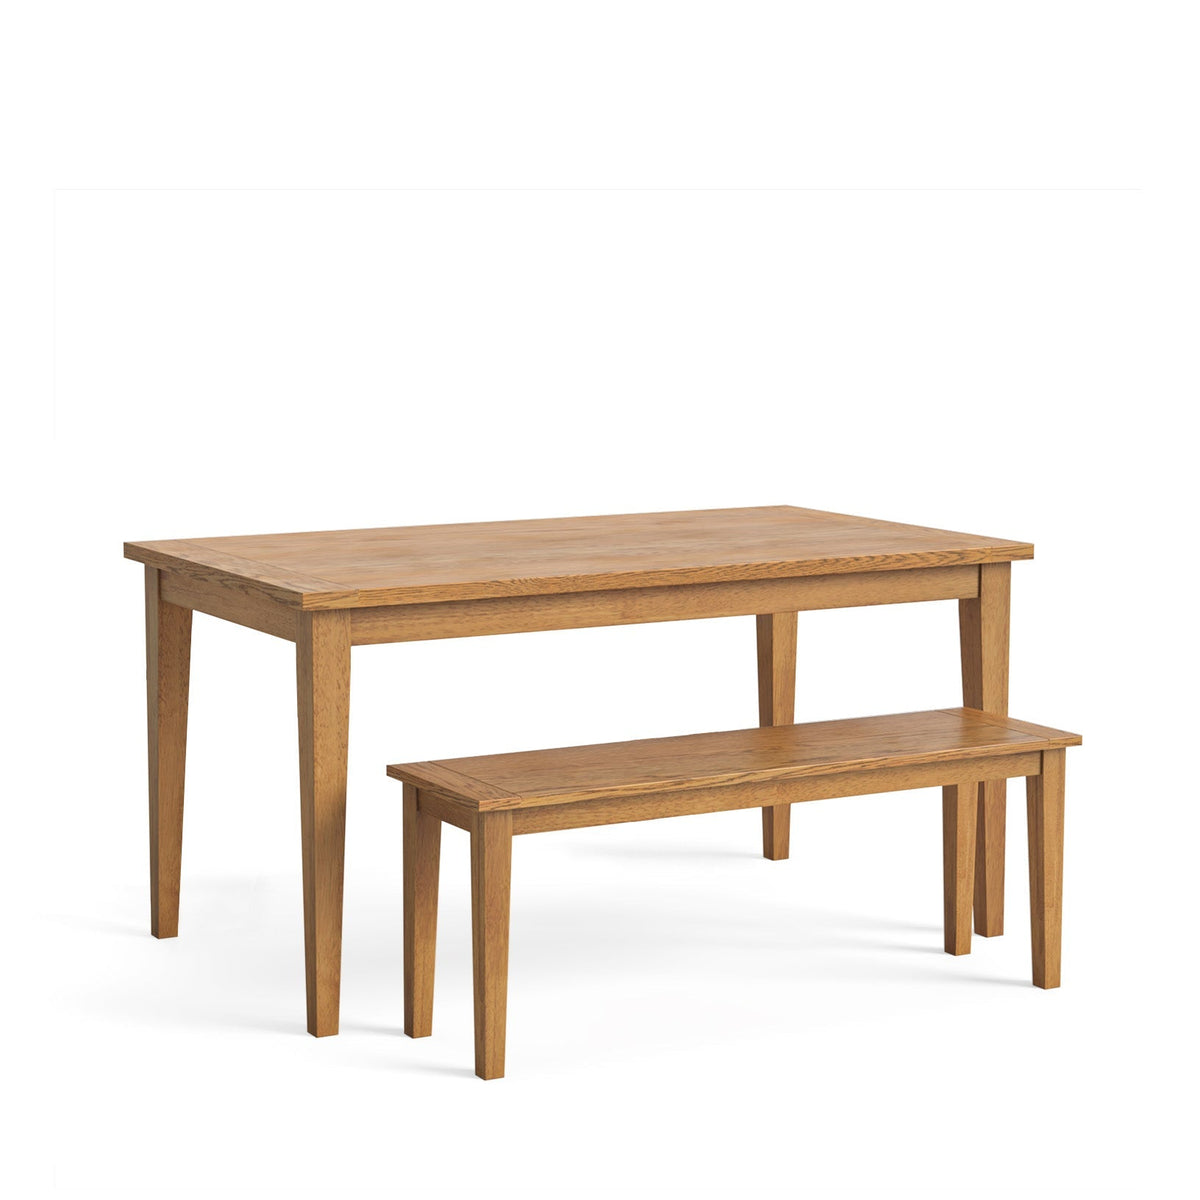 Fran Oak 150cm Dining Table and Bench Set